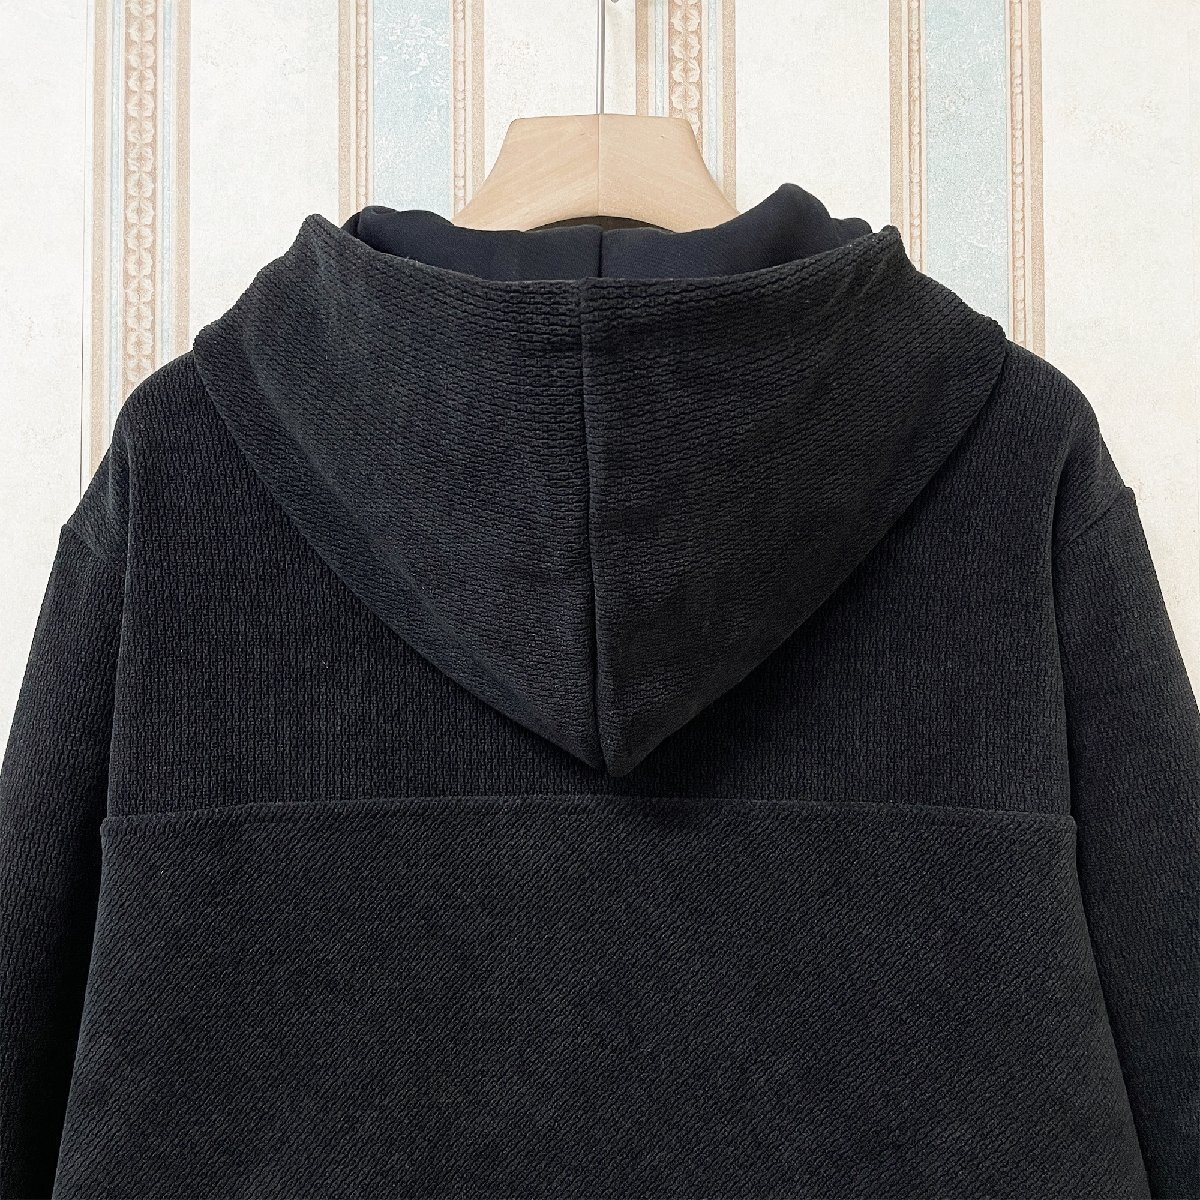  standard regular price 5 ten thousand FRANKLIN MUSK* America * New York departure Parker cashmere comfortable warm thick pull over simple unisex size 3